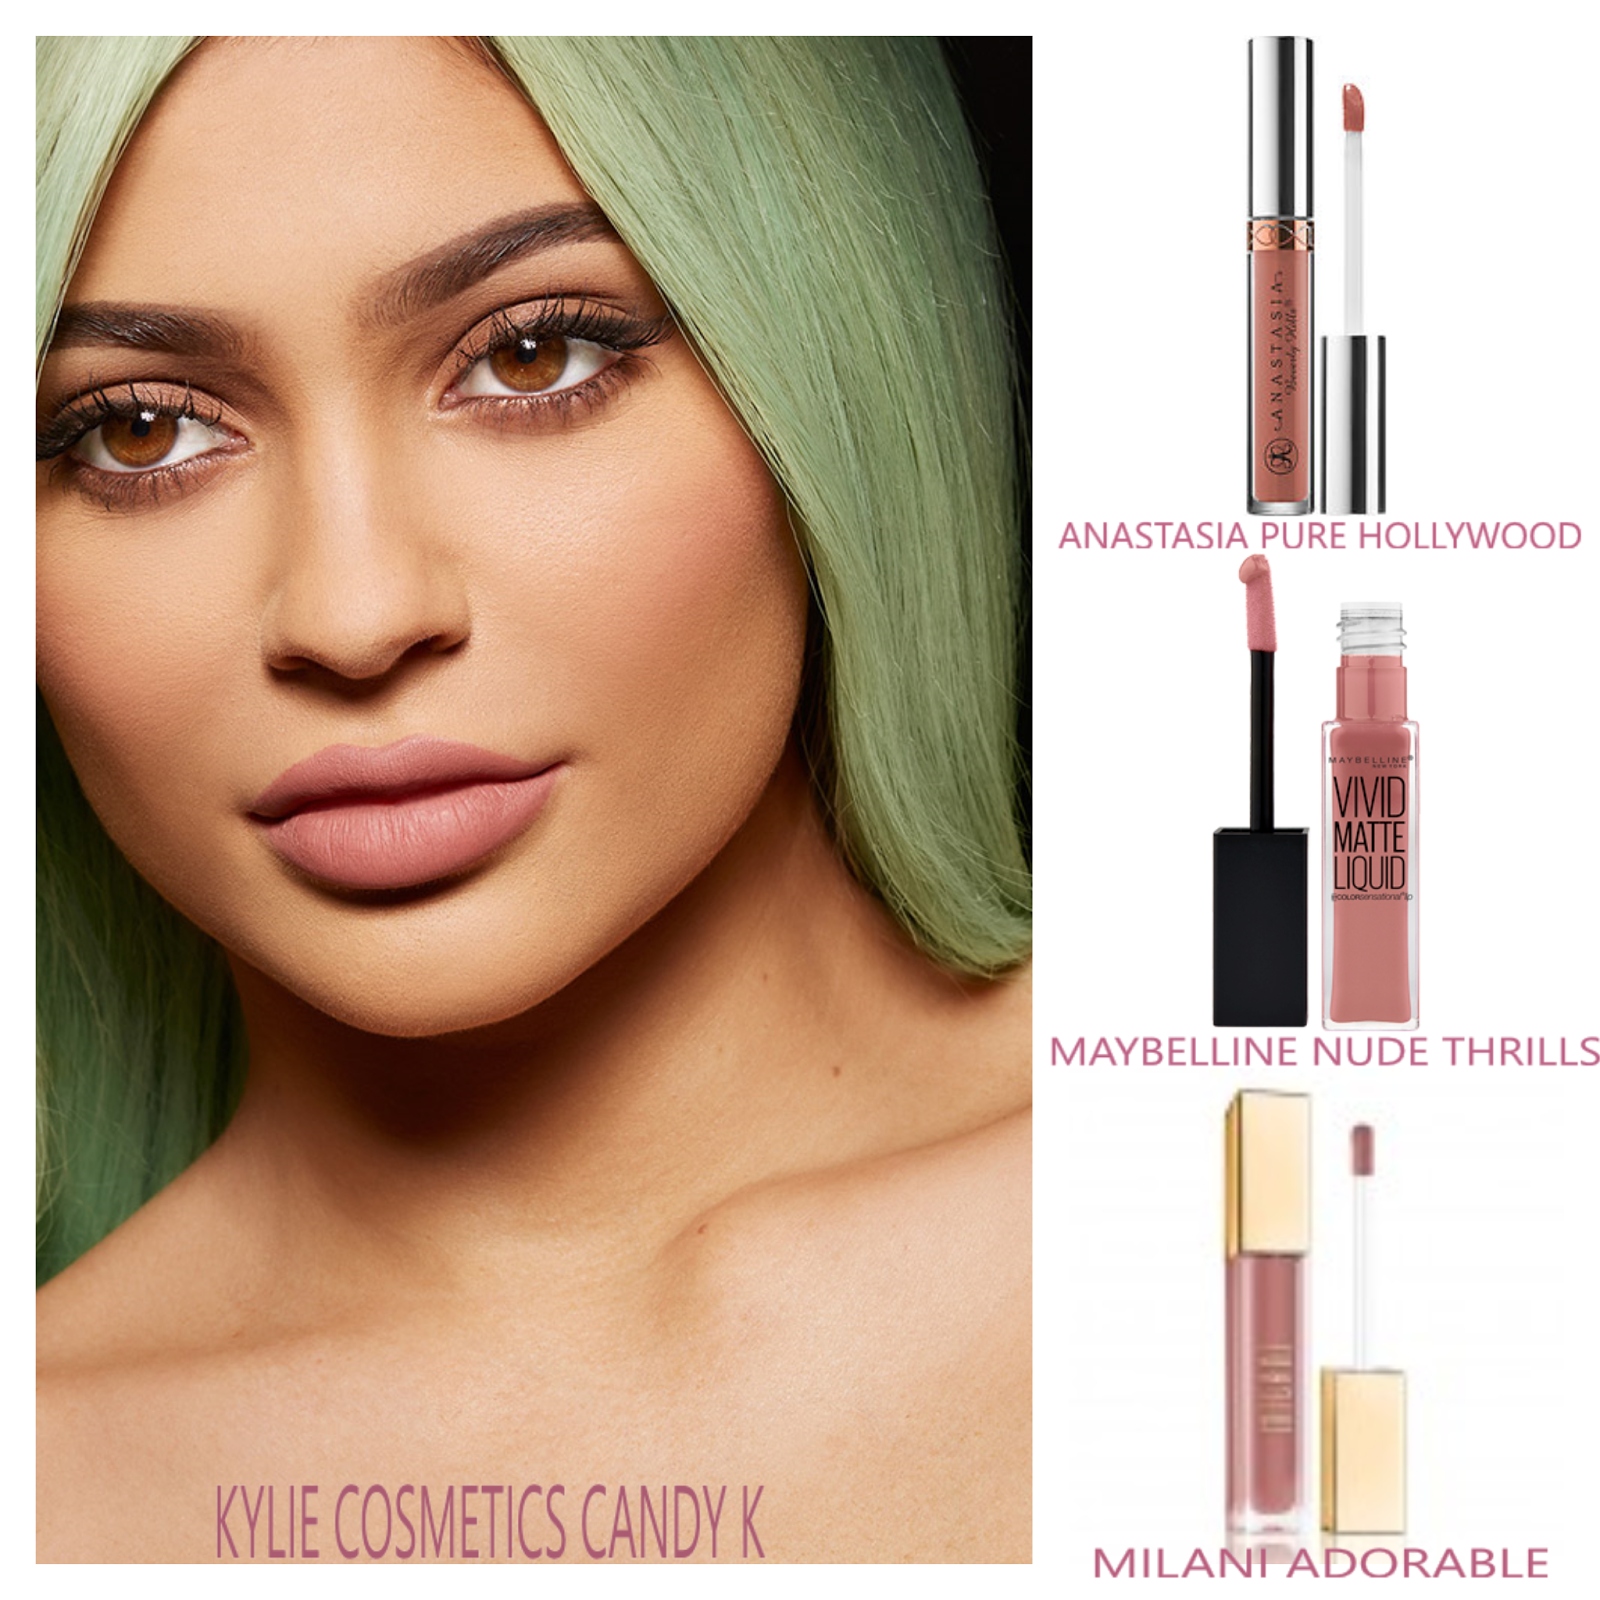 20 CHEAP DUPES FOR THE KYLIE JENNER LIP KIT